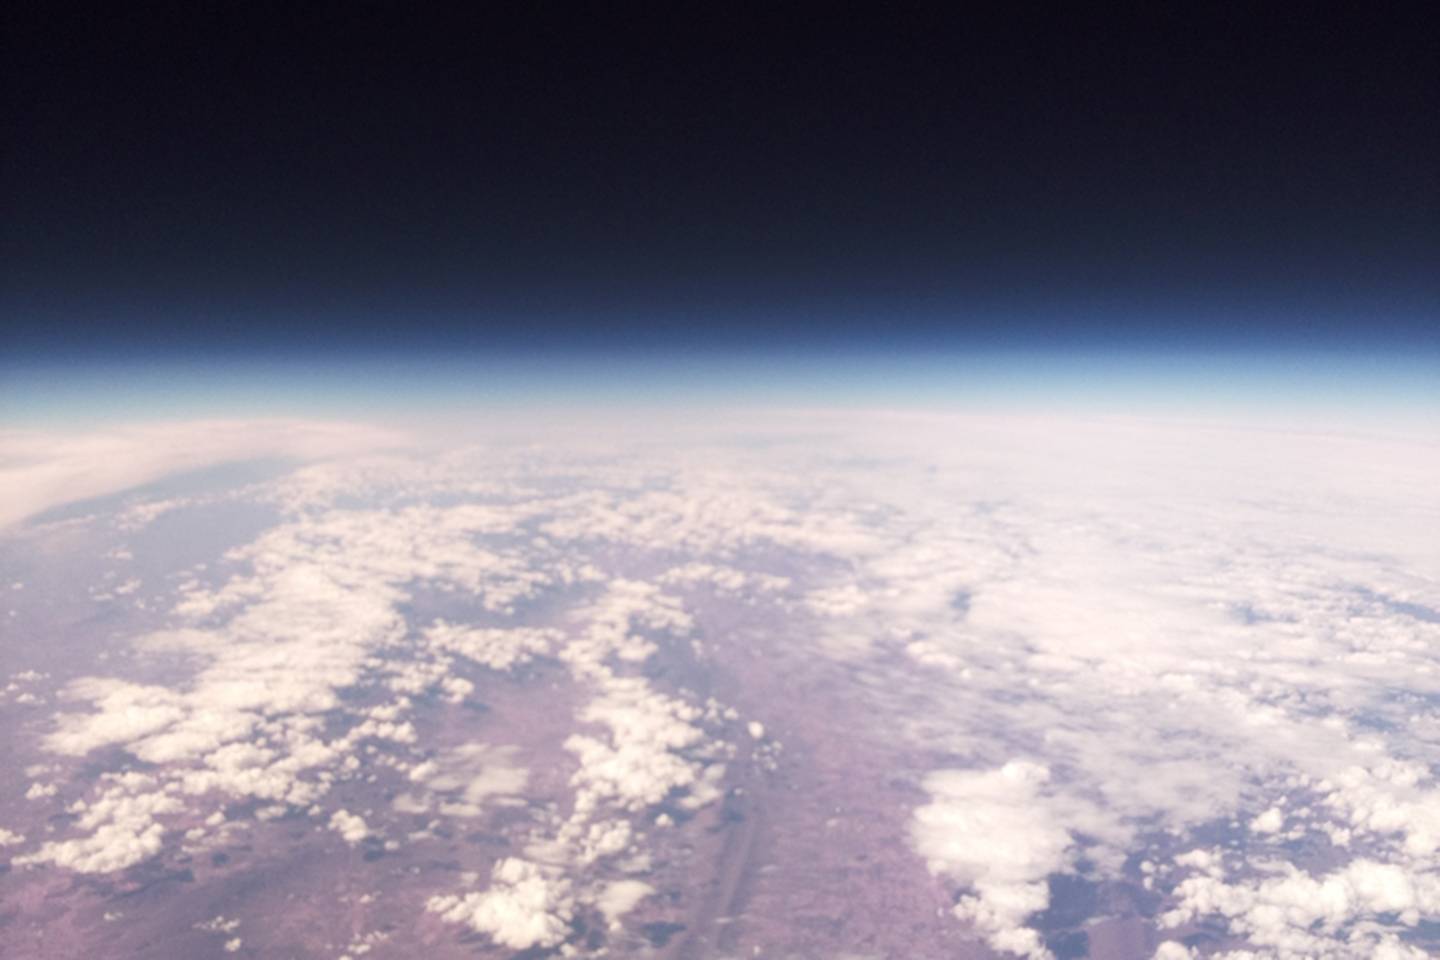 Photo taken of the Earth from the atmosphere at the balloon's peak height